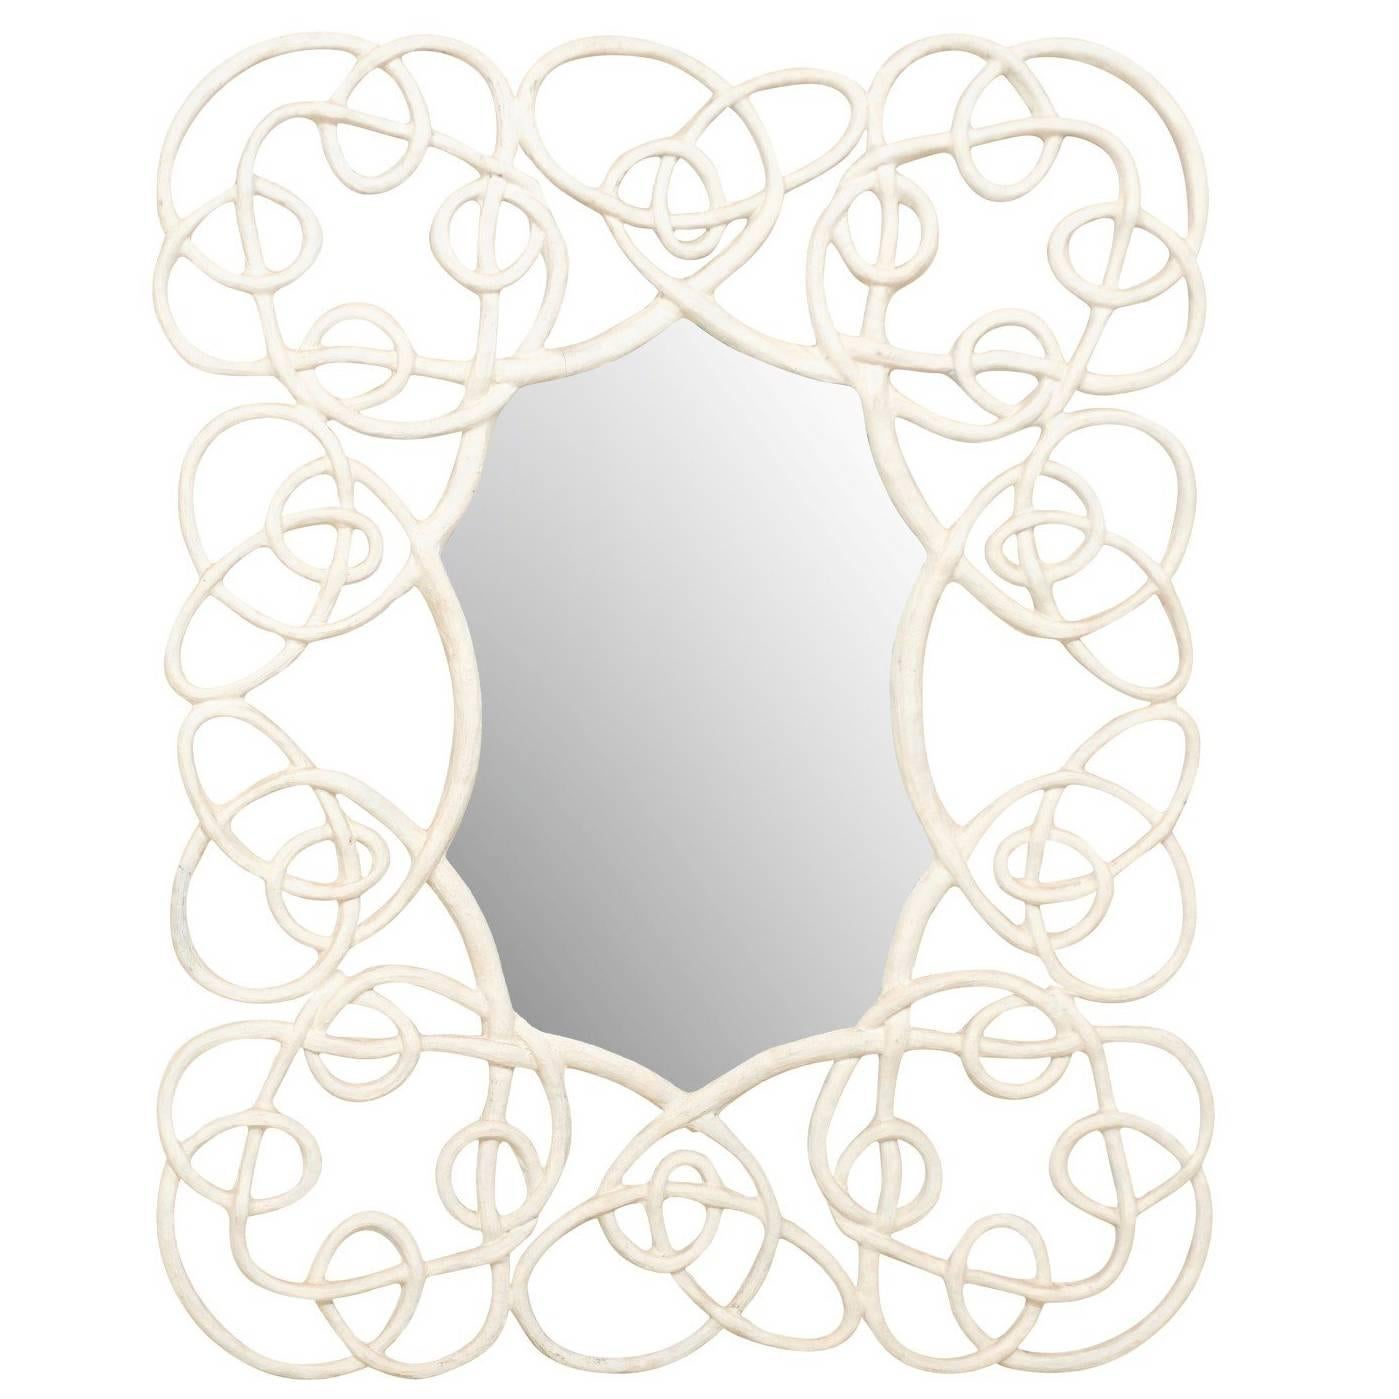 Large Wall Mirror with Intricate Twisting Vine like Pattern in the Surround